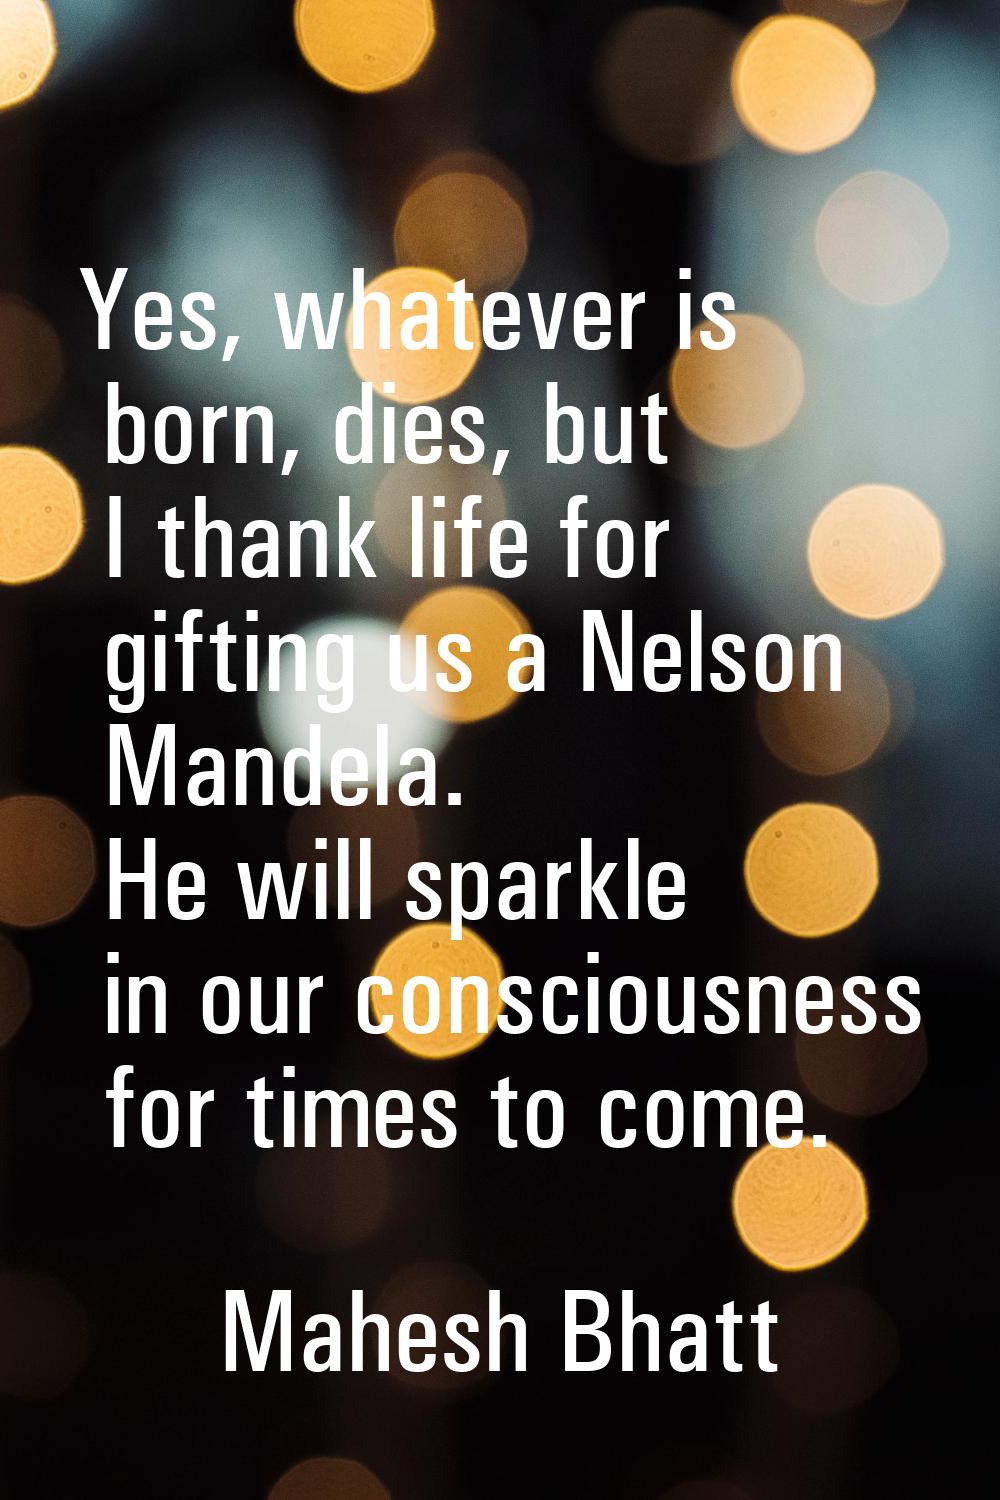 Yes, whatever is born, dies, but I thank life for gifting us a Nelson Mandela. He will sparkle in o